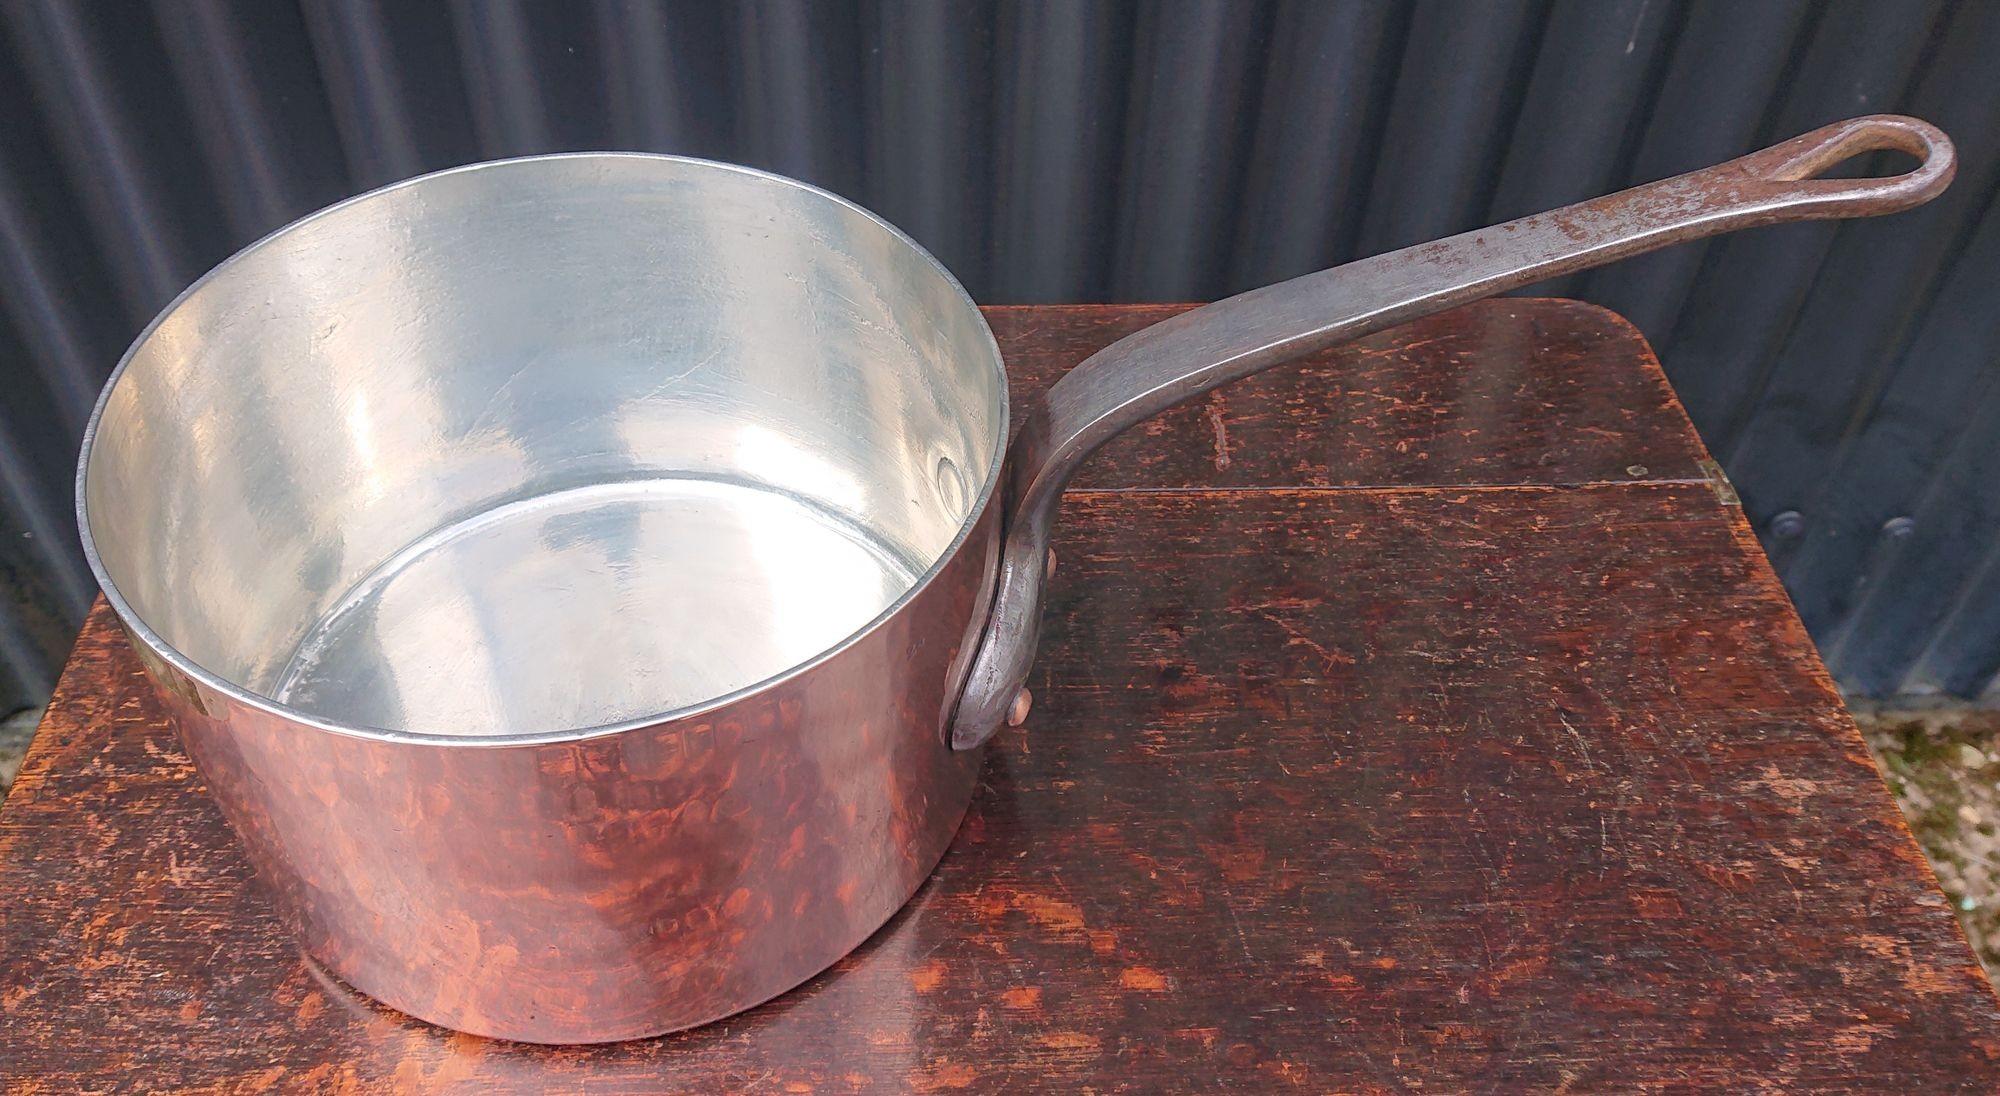 Remarkably good condition Dehillerin 24cm saucepan, this pan has been professionally re-tinned, it has three large rivets, large handle, tear drop shape hanging hole, the stamp would indicate a date of around 1890 acccording to the VFC site. All in